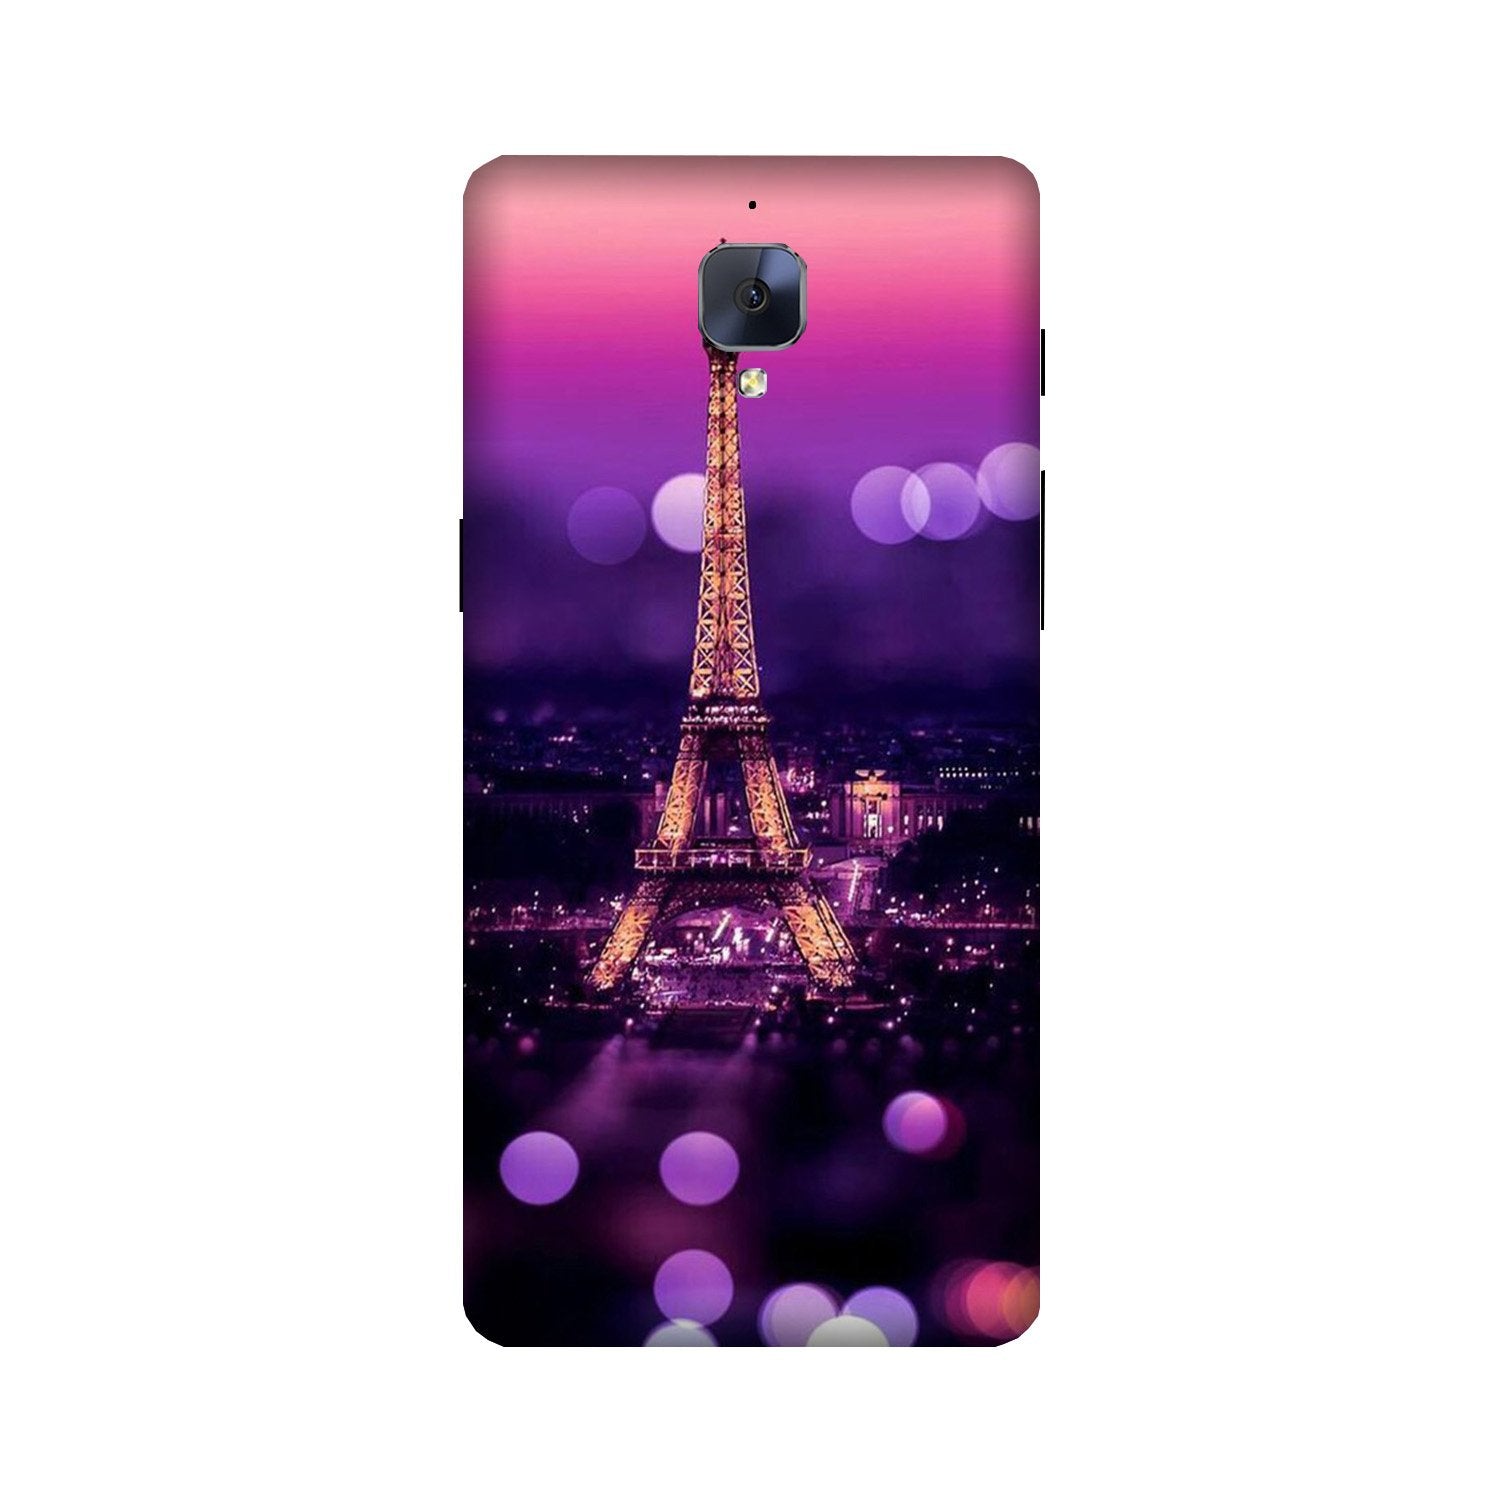 Eiffel Tower Case for OnePlus 3/ 3T